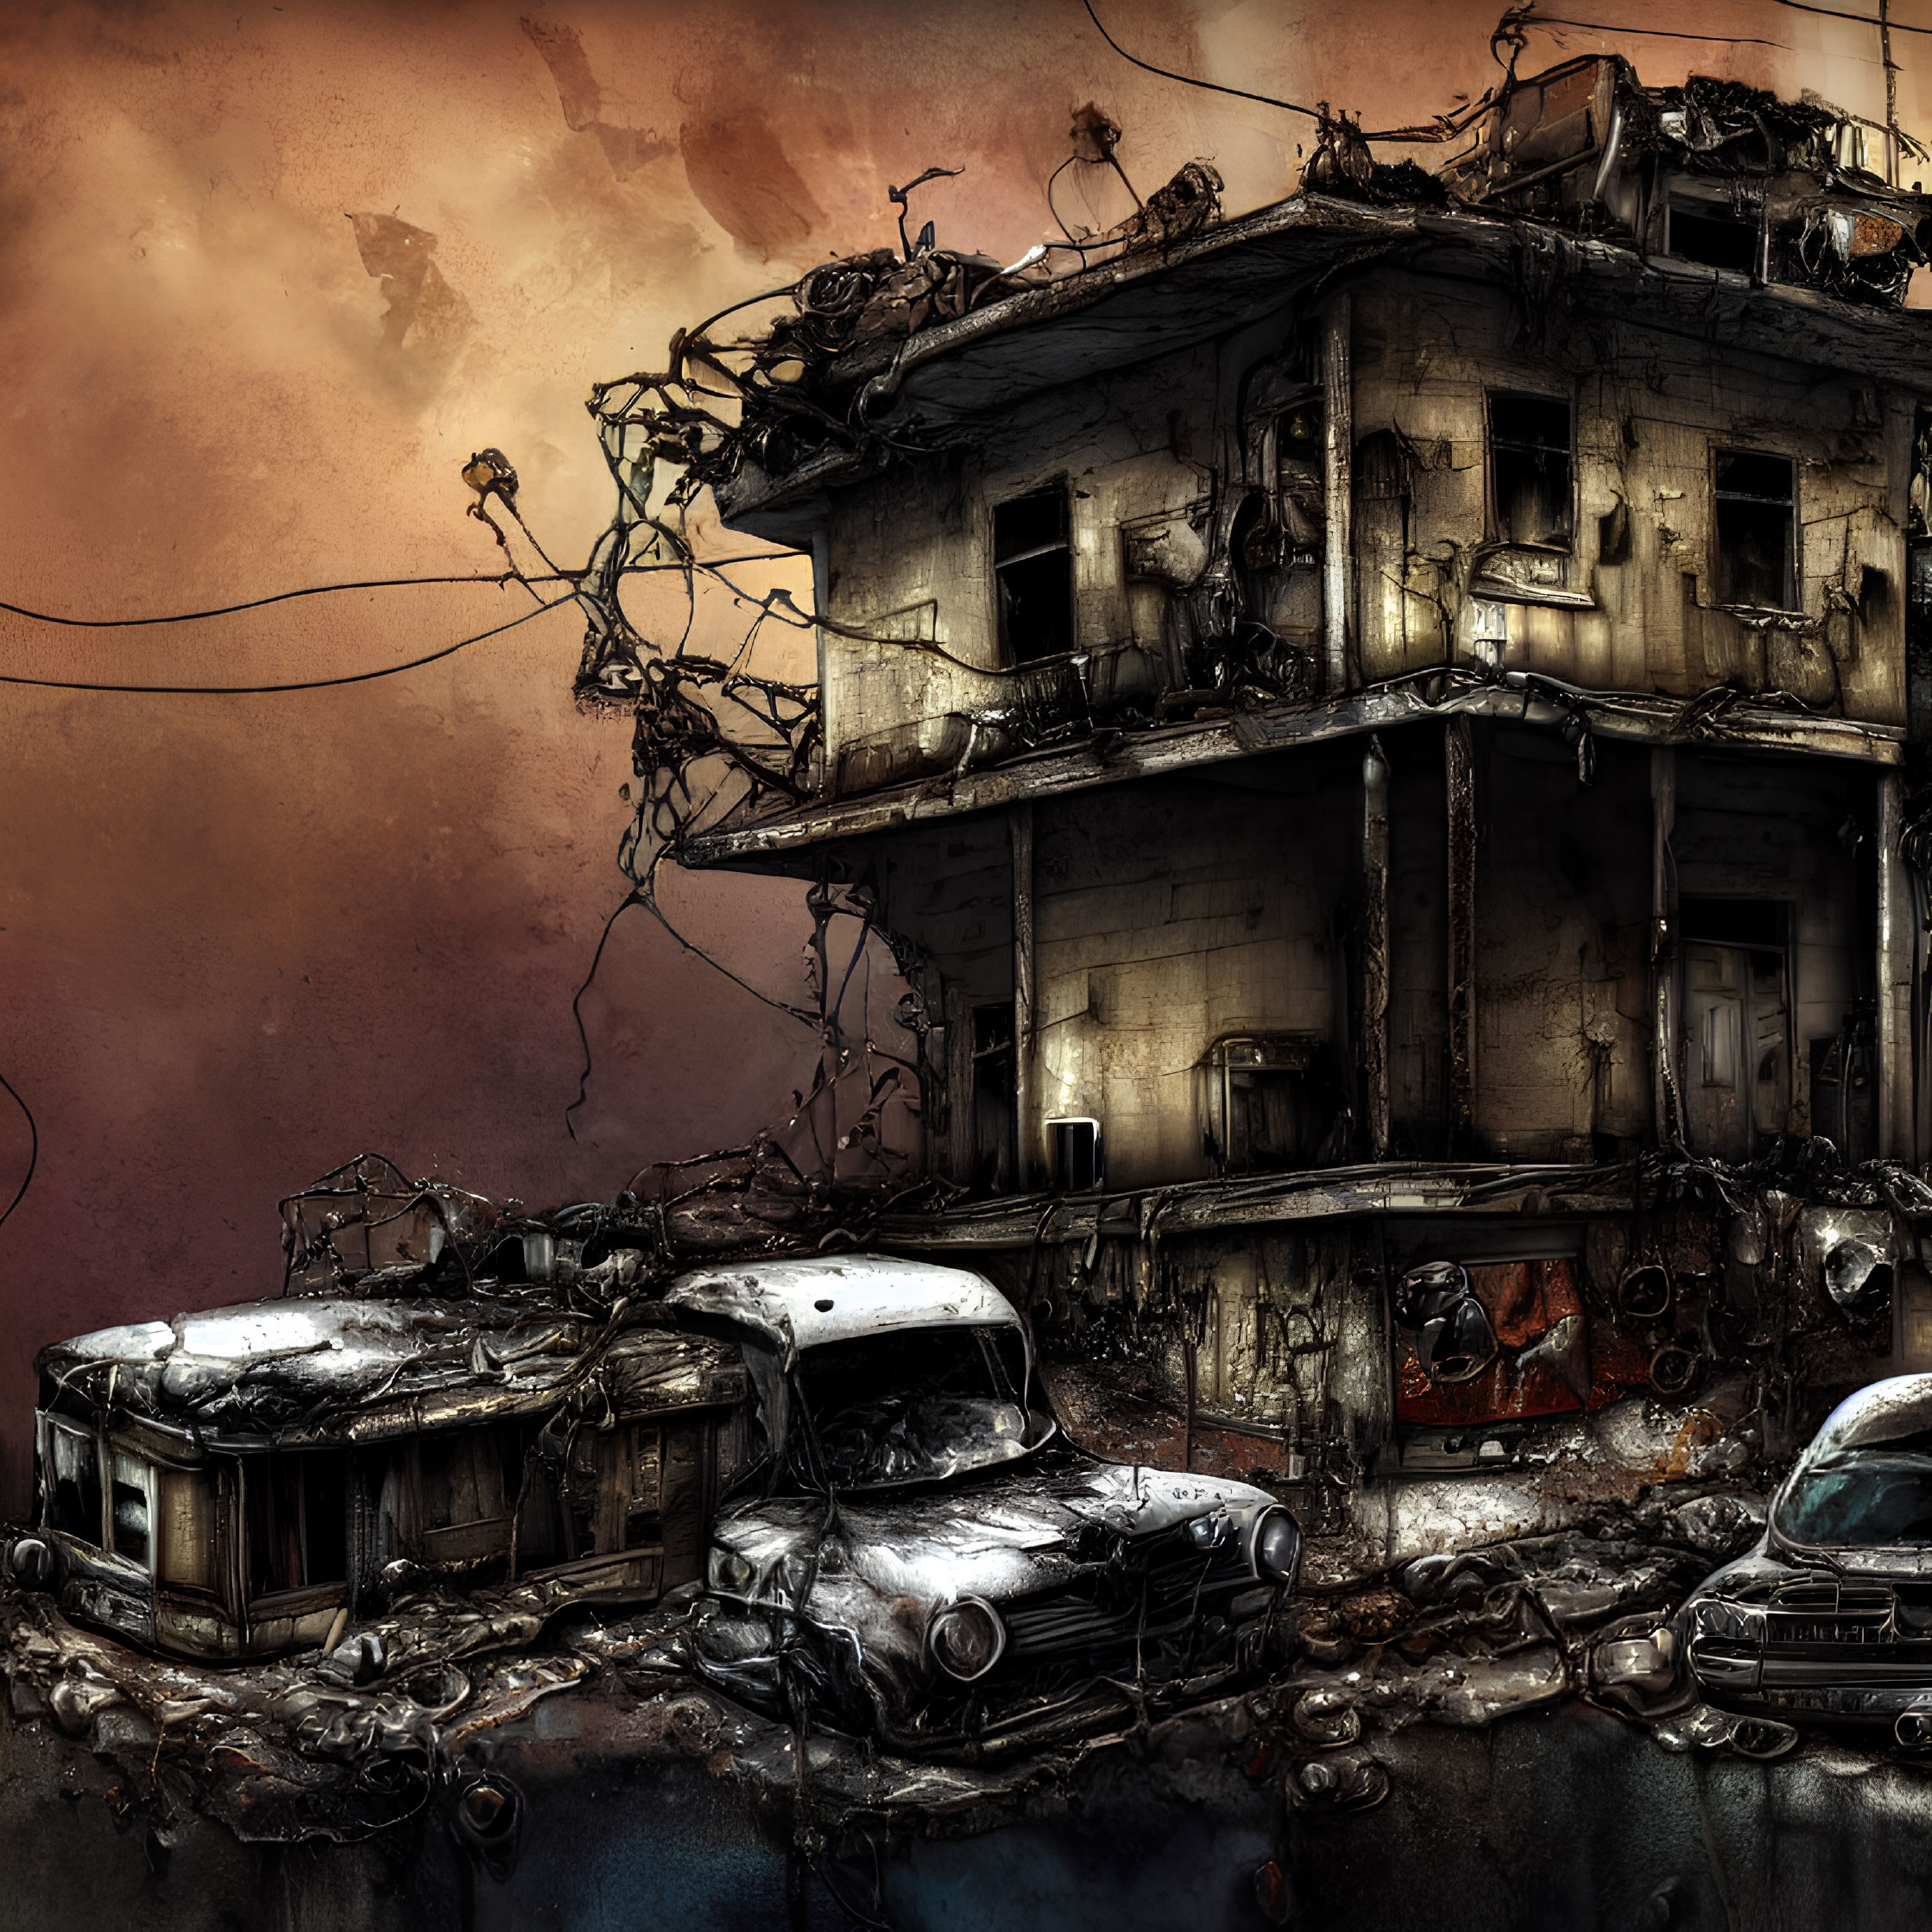 Dilapidated building and rusted cars in post-apocalyptic scene